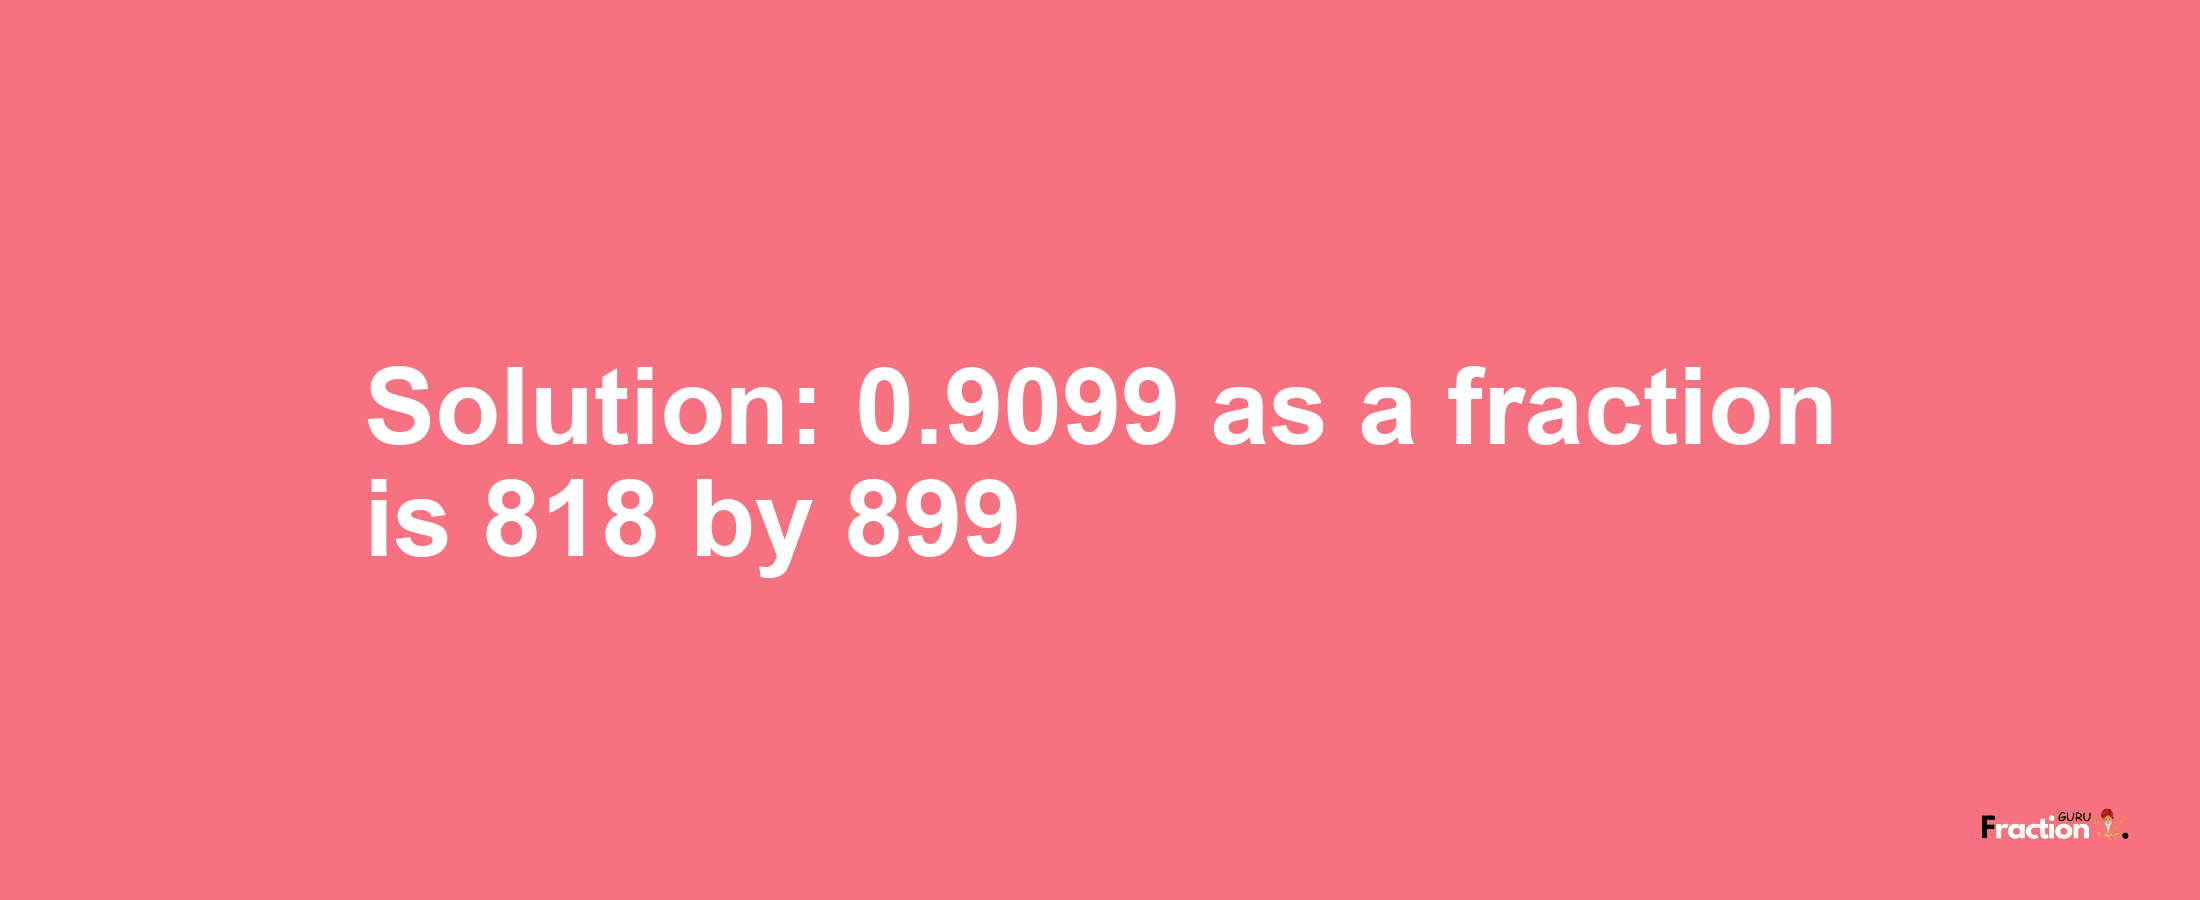 Solution:0.9099 as a fraction is 818/899